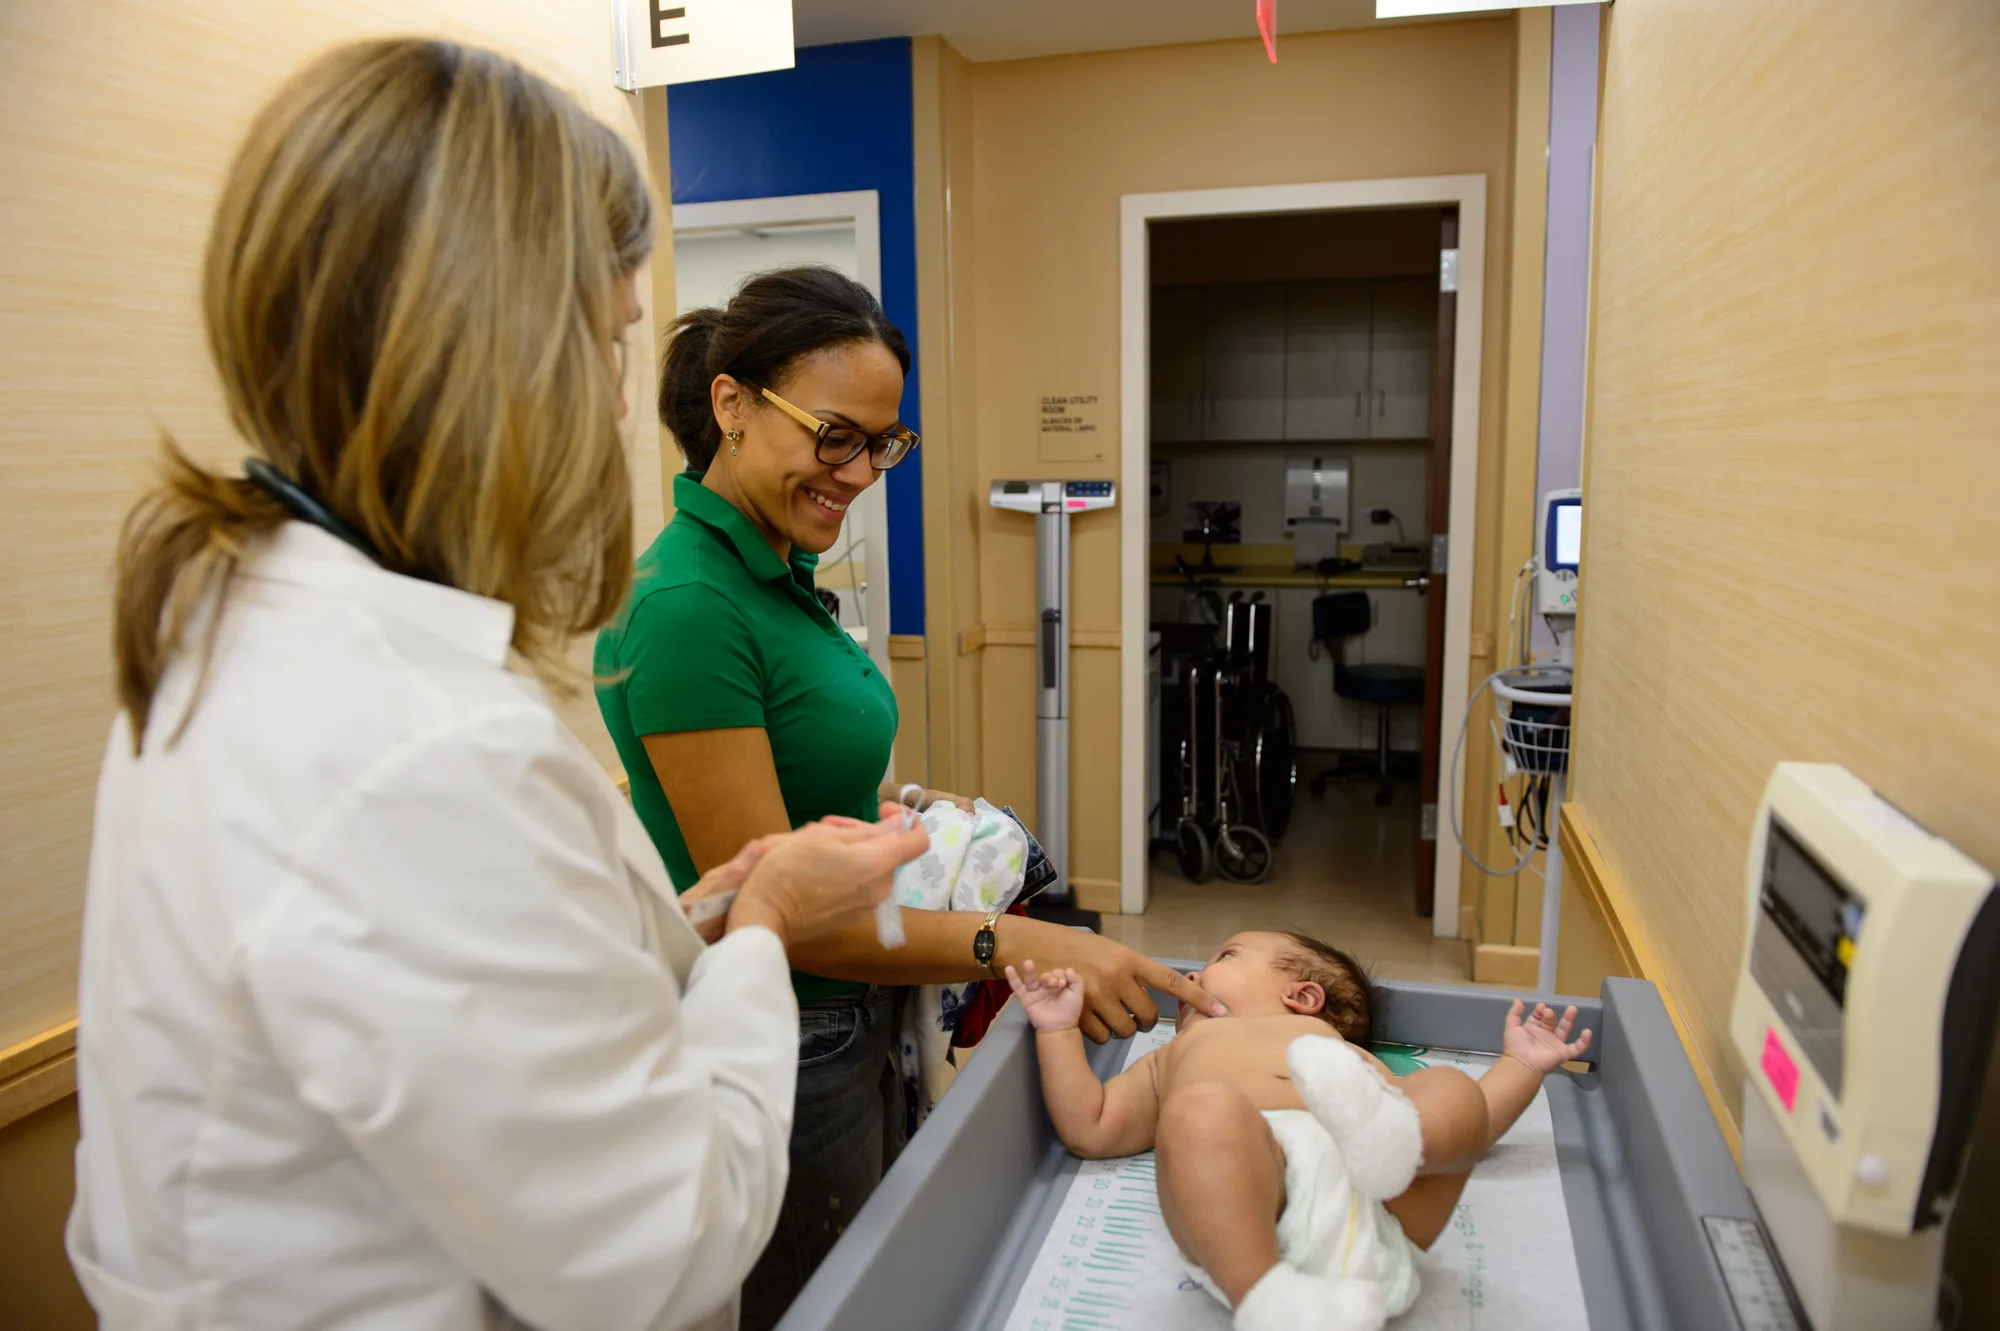 Two health professionals examining an infant in a hospital setting.